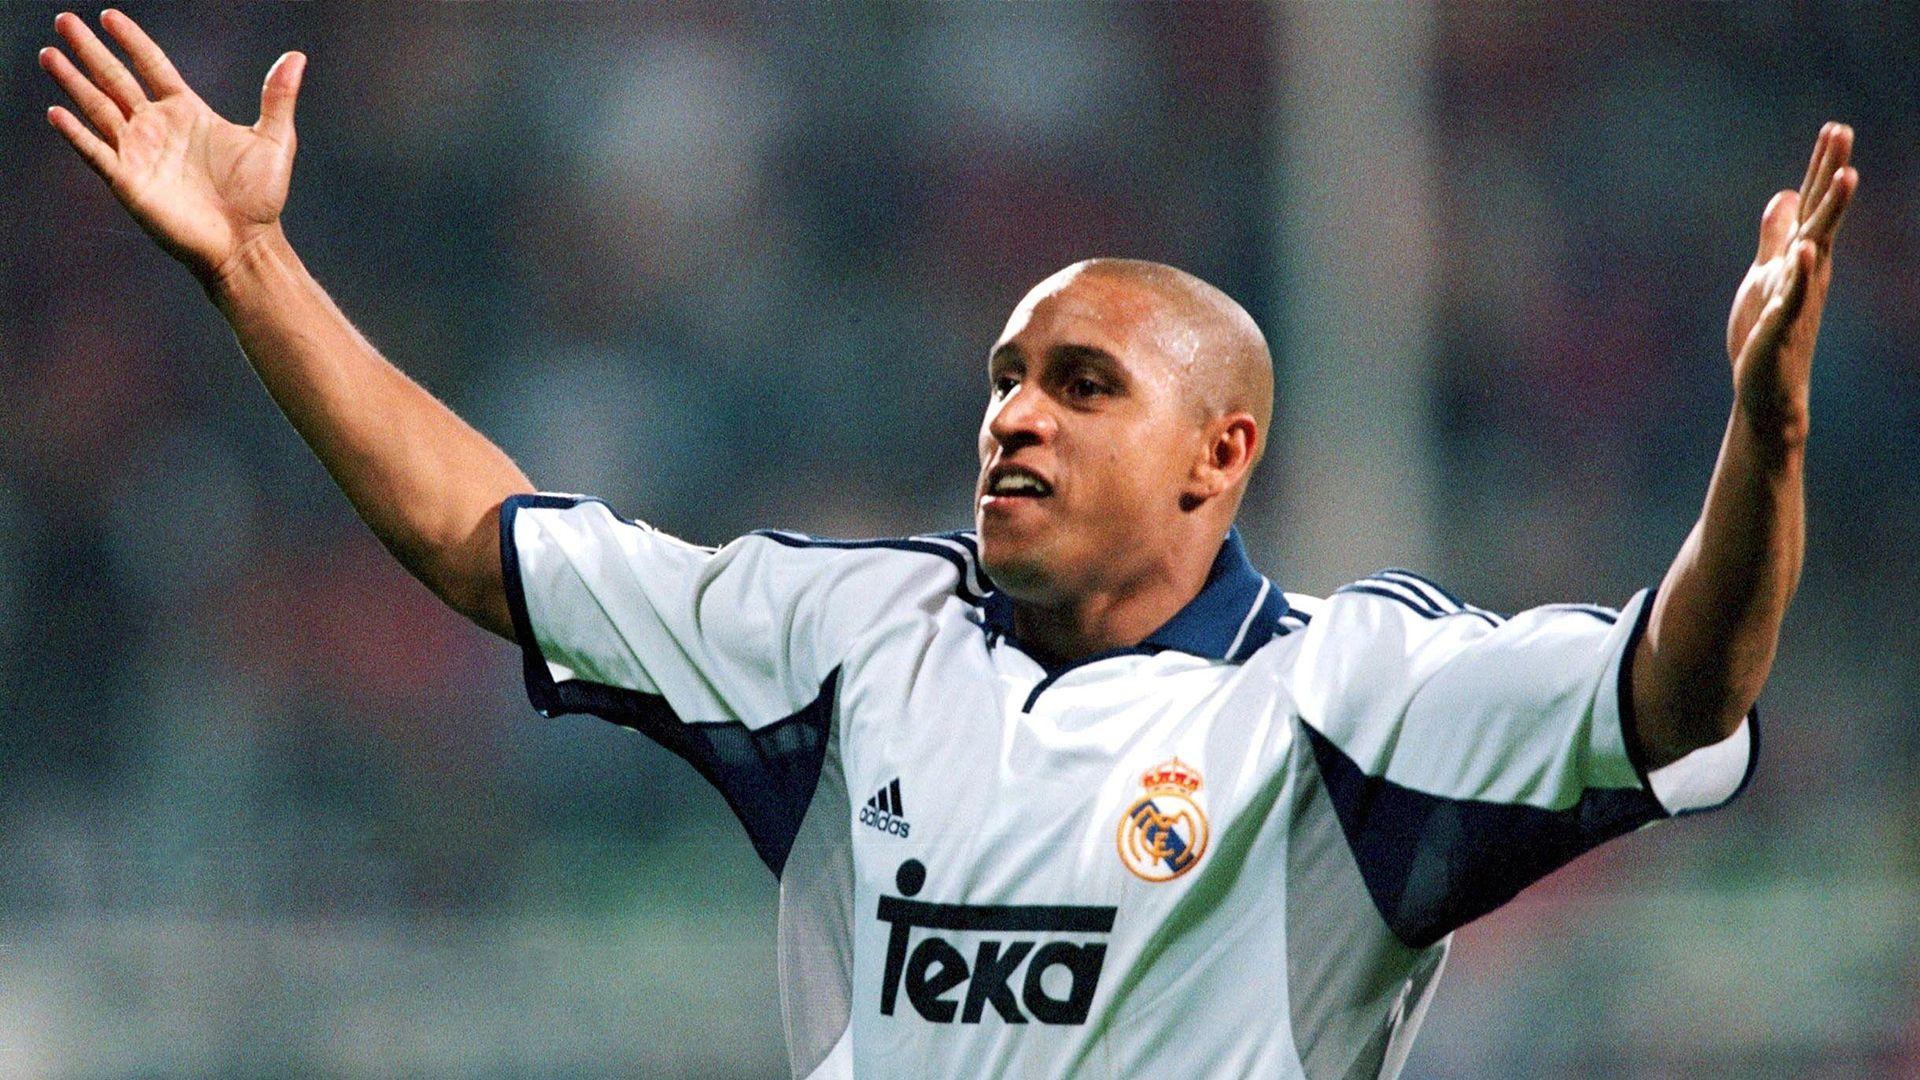 Roberto Carlos Picture by Namik Amirov - Image Abyss